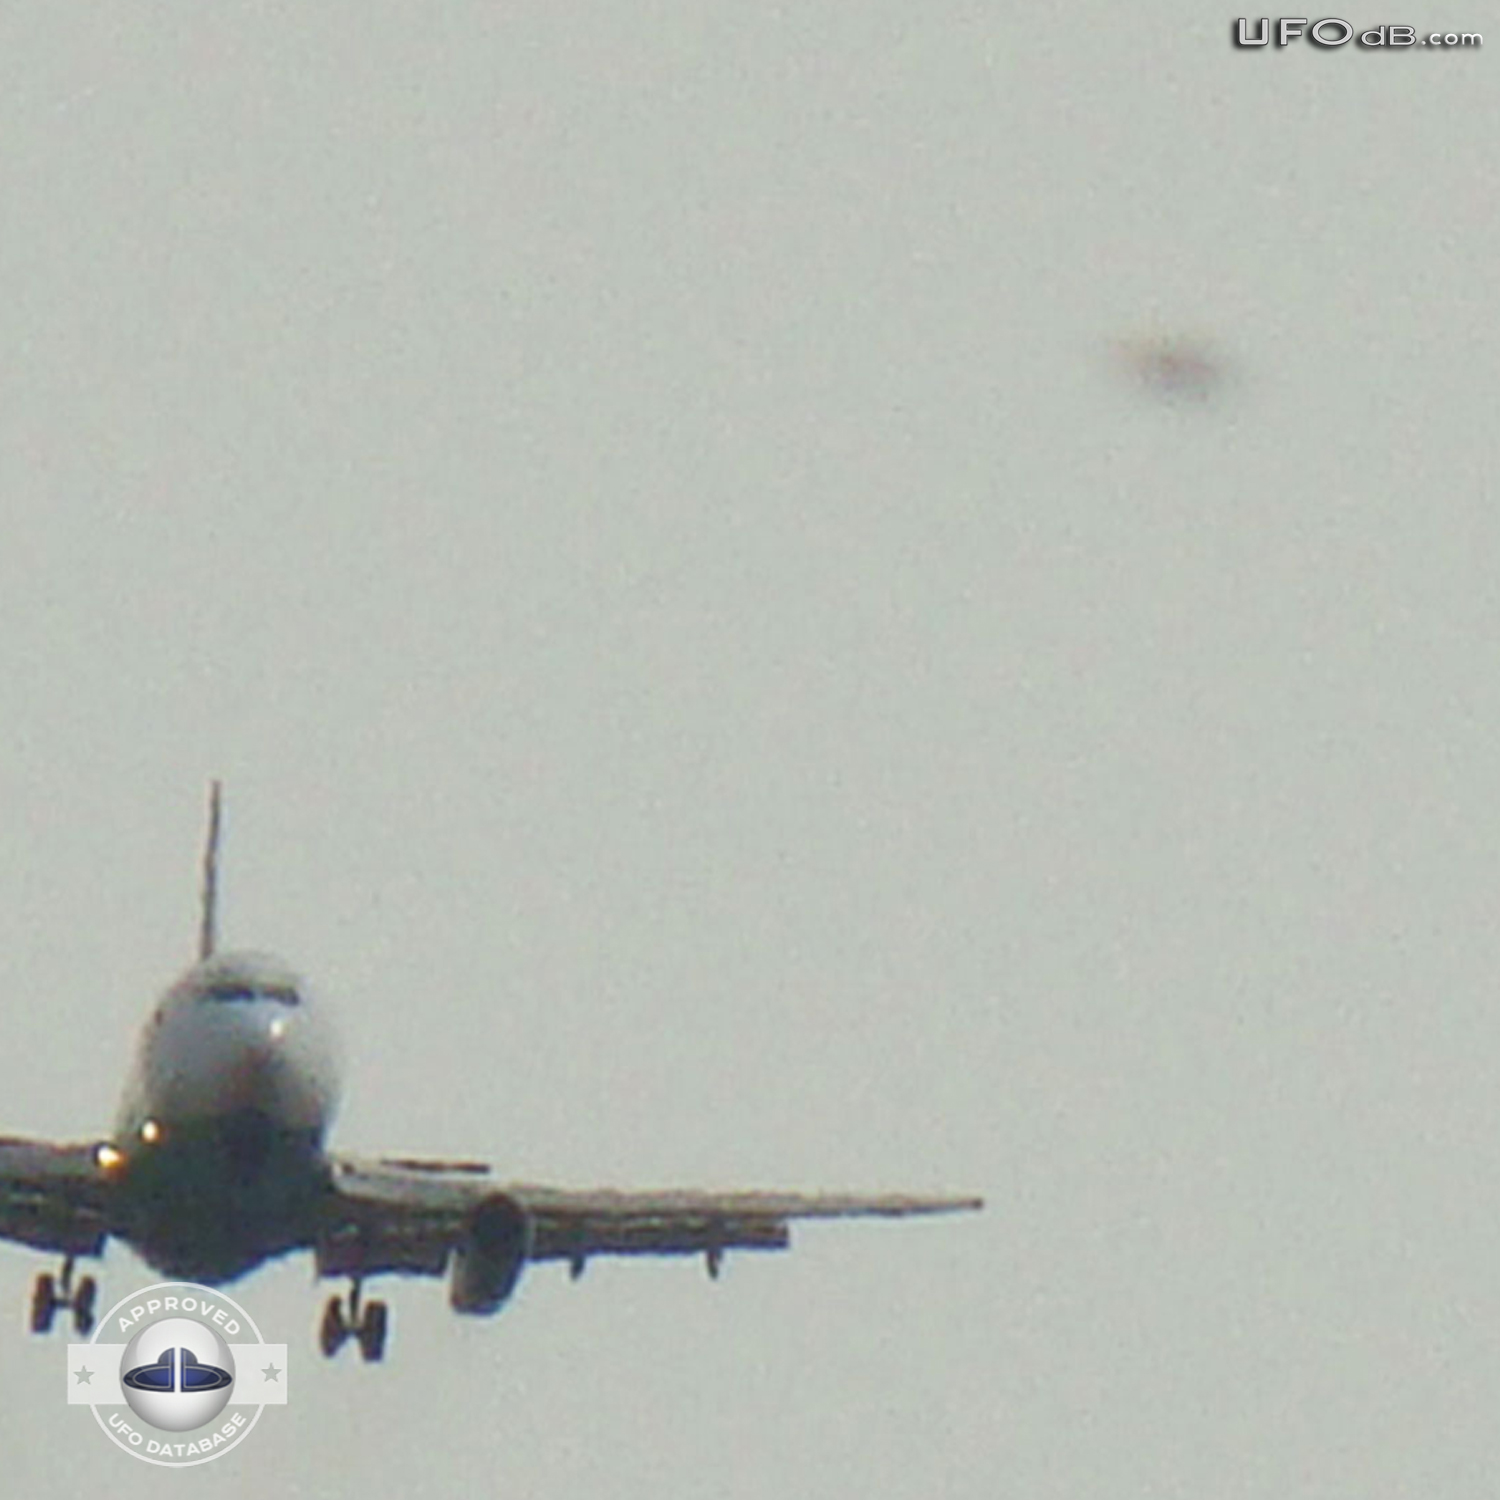 Witness near Maracaibo Airport takes a picture of a UFO near Airplane UFO Picture #351-2